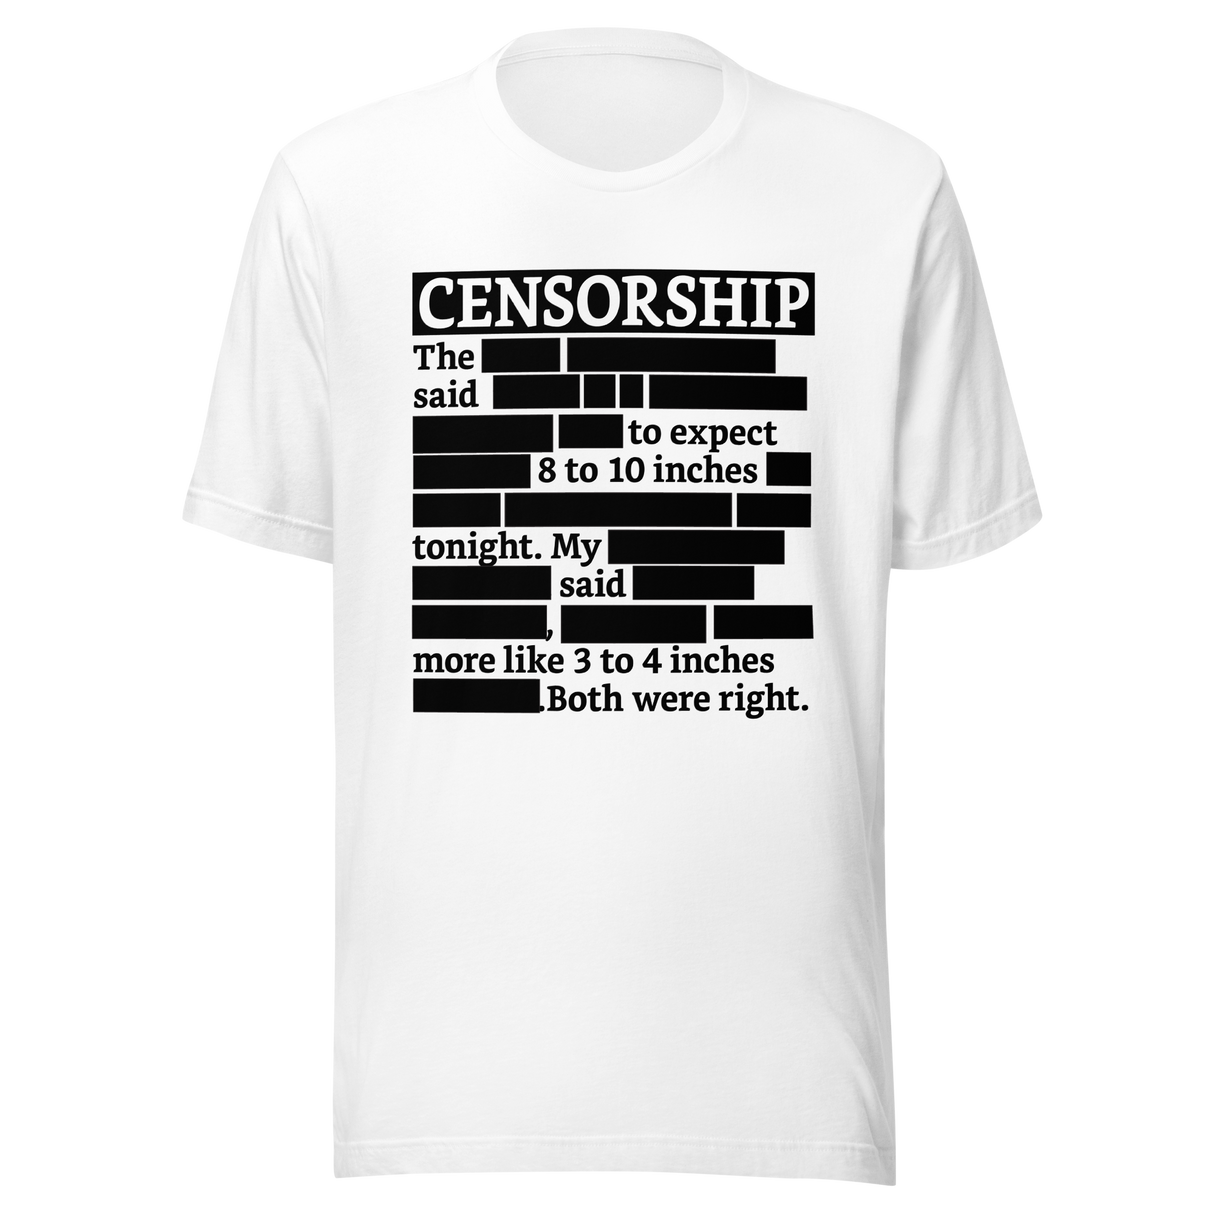 censorship-the-said-to-expect-8-to-10-inches-tonight-my-husband-said-more-like-3-to-4-inches-both-were-right-censorship-tee-funny-weatherman-tee-tee#color_white